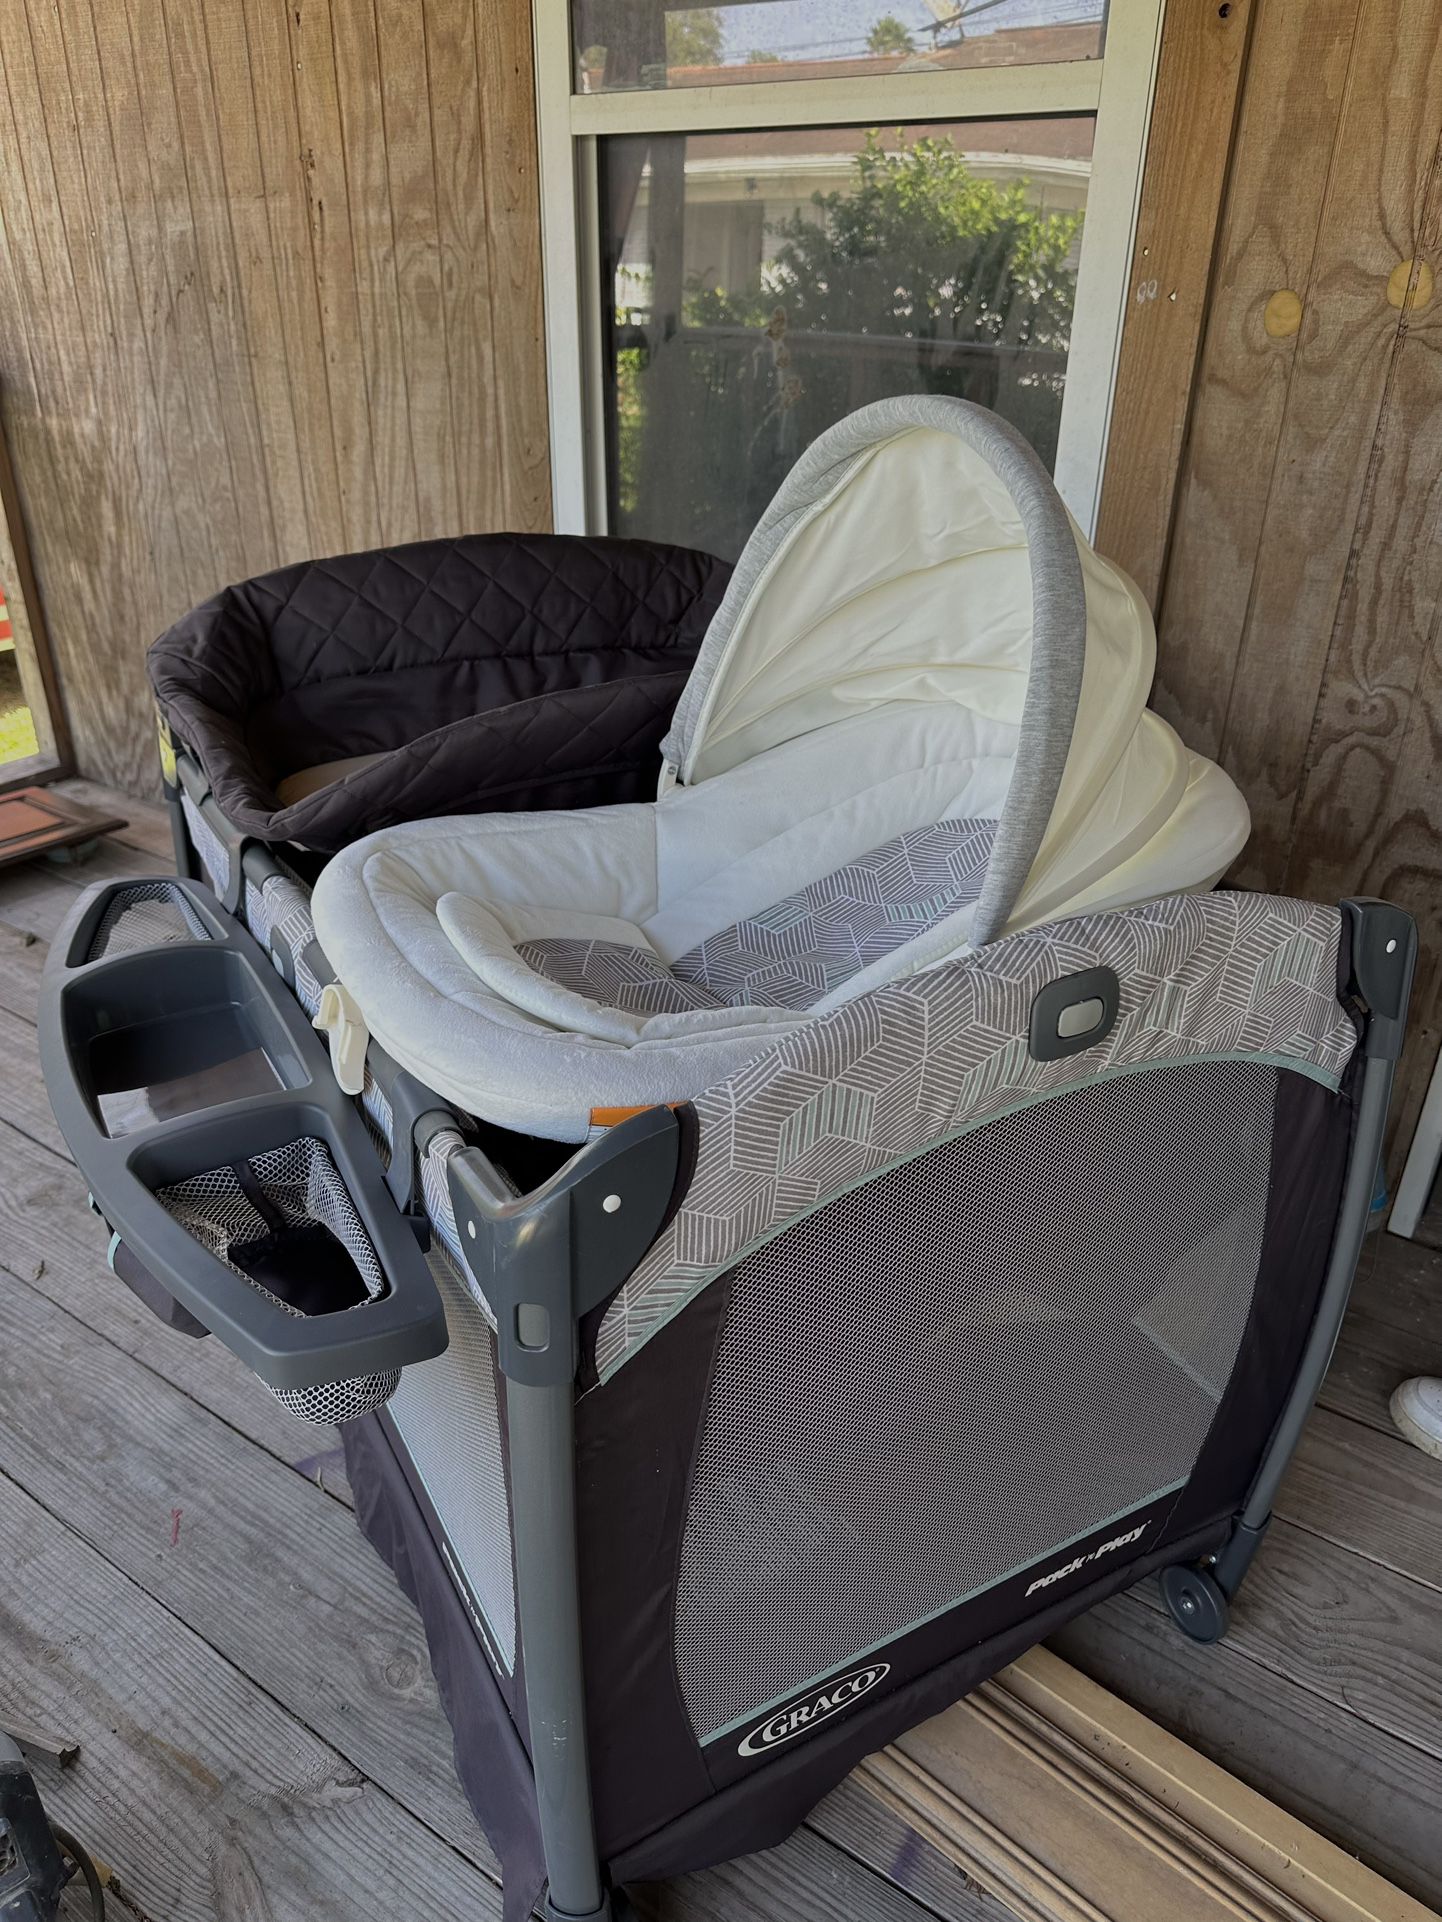 Pack ‘n Play Bassinet Playard, Portable Bassinet Diaper Changer, and More.